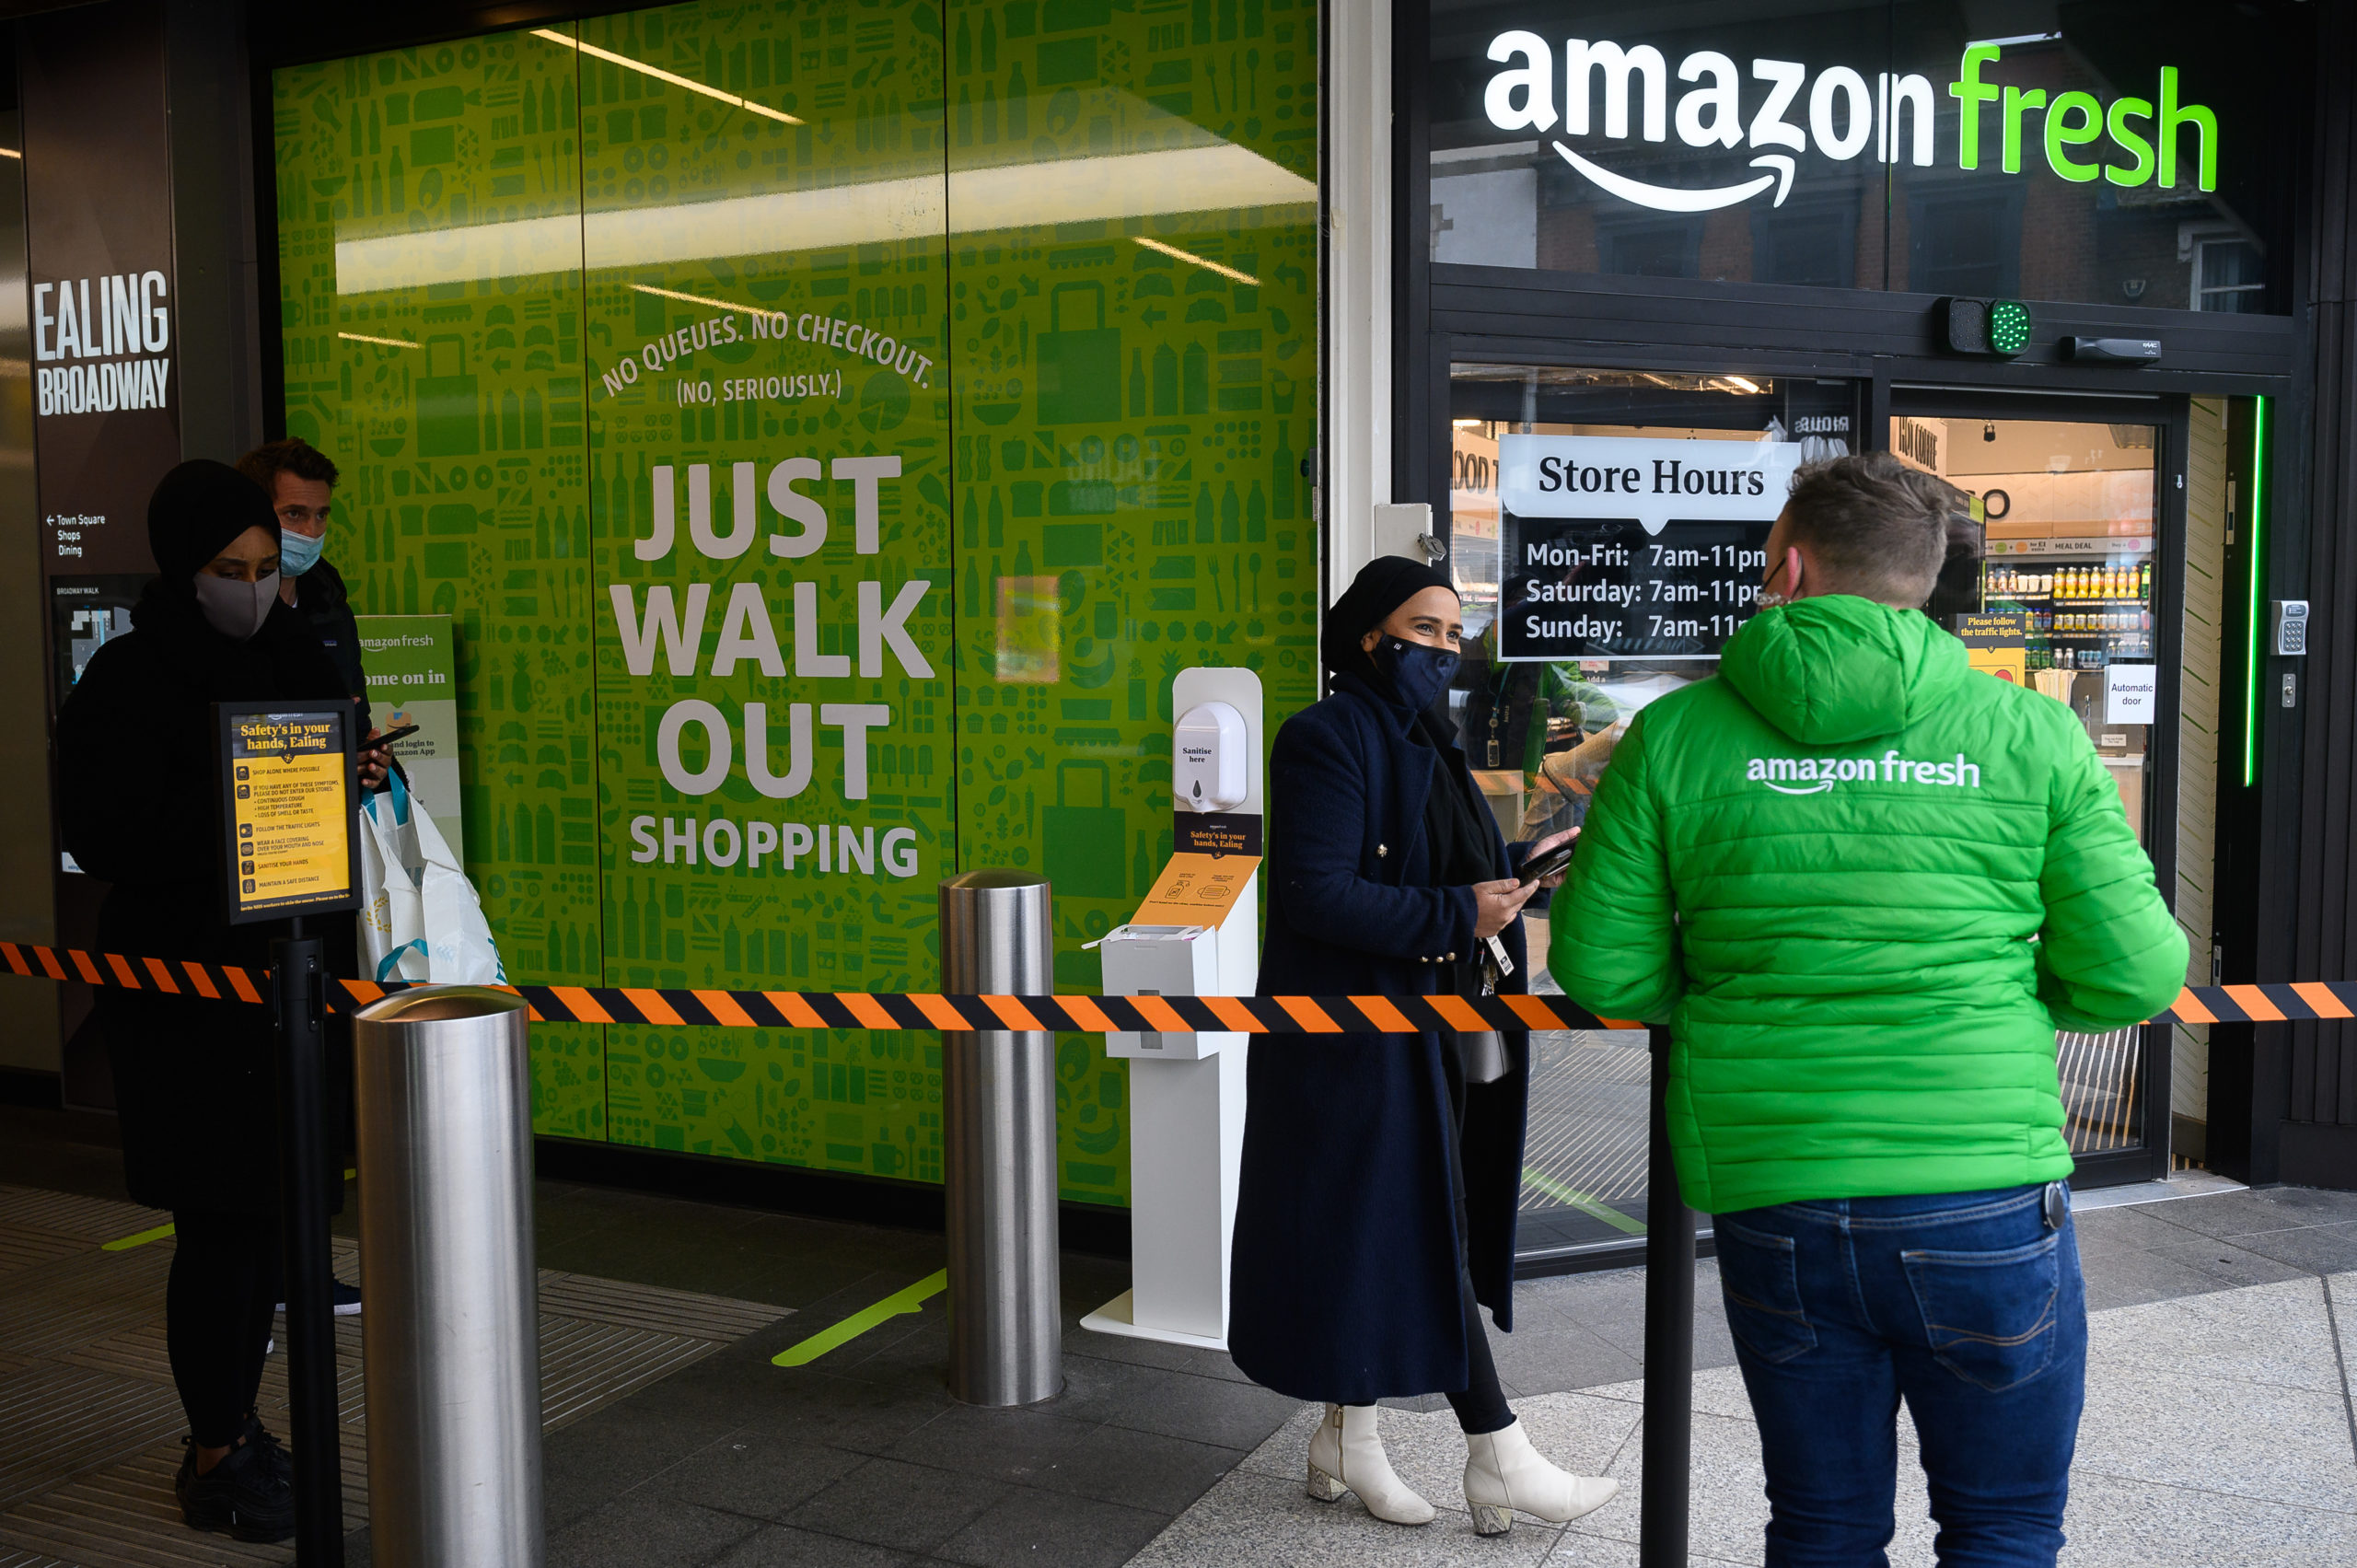 Members of staff assist customers as they wait to enter an Amazon Fresh on March 4. (Leon Neal/Getty Images)